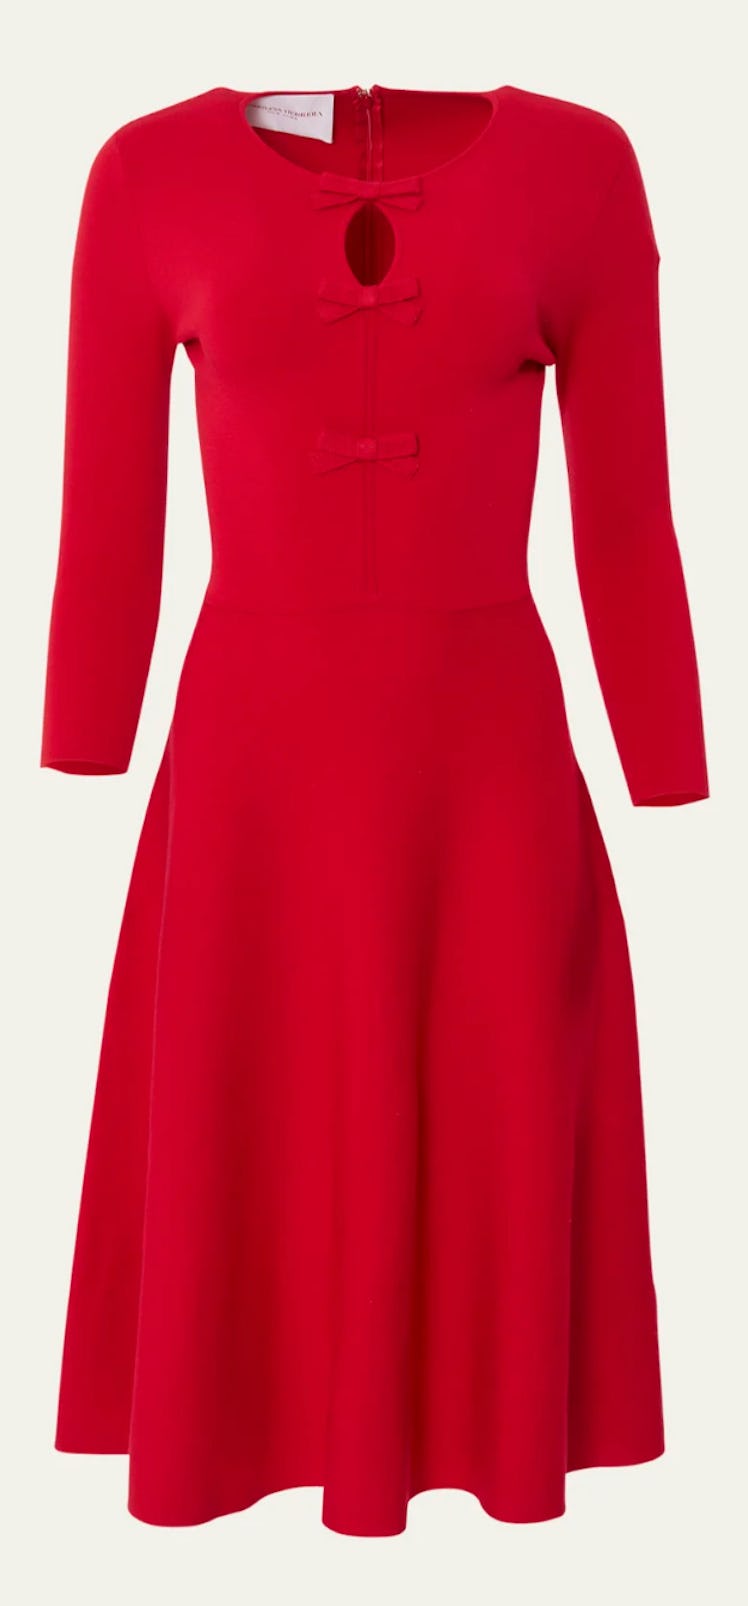 red midi dress with bow detail